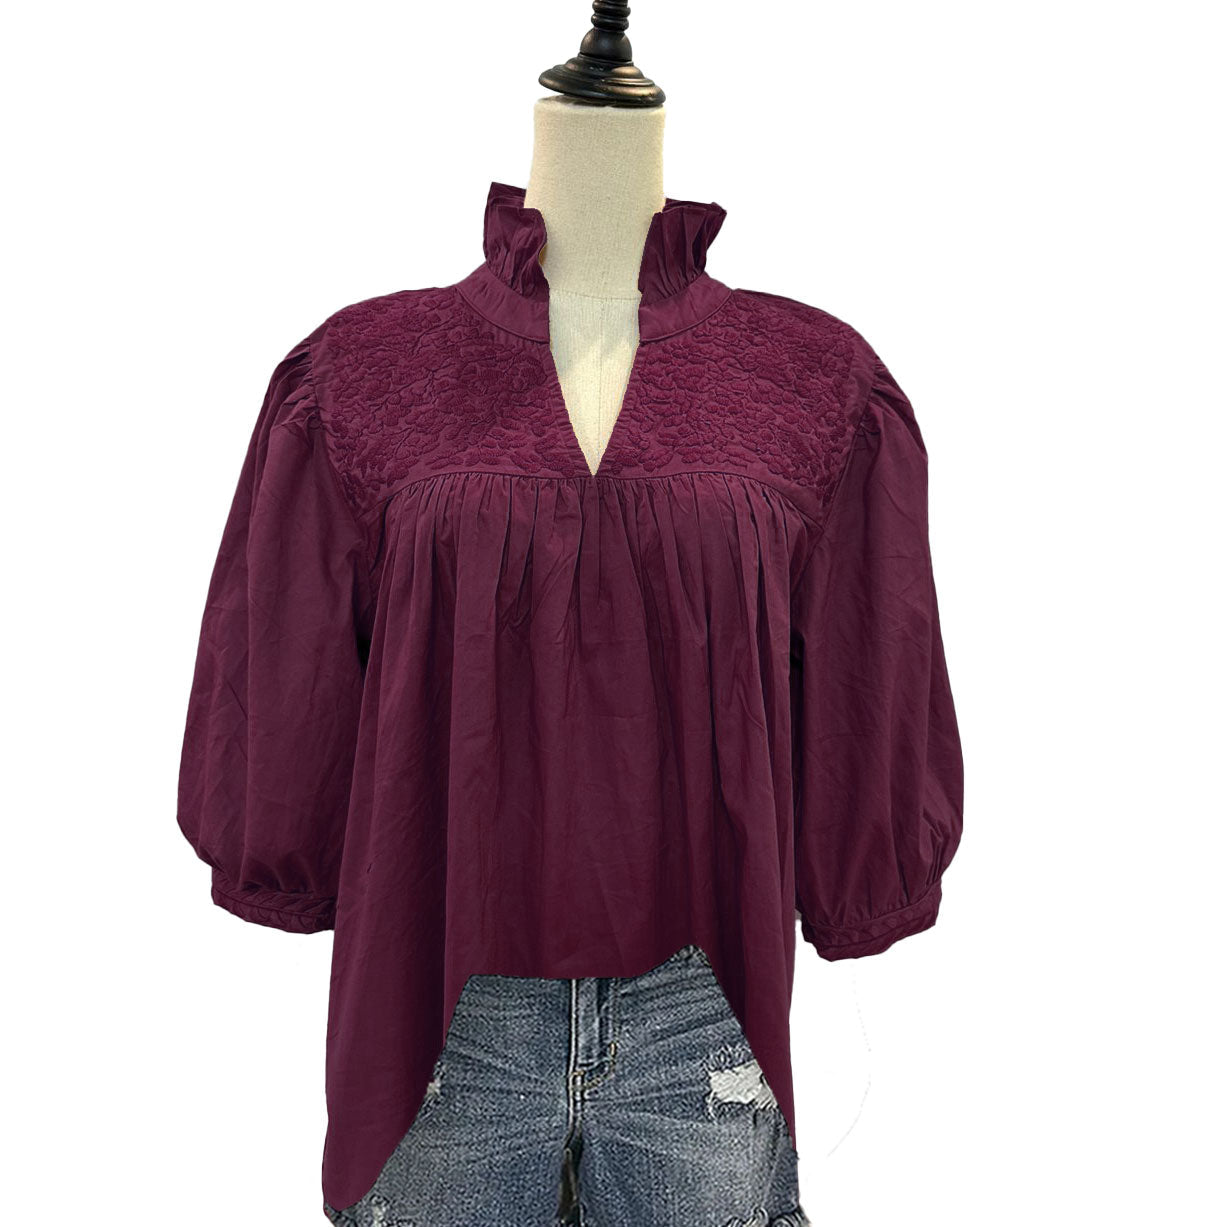 PRE-ORDER: Double Maroon Tailgater Blouse (late July ship date)